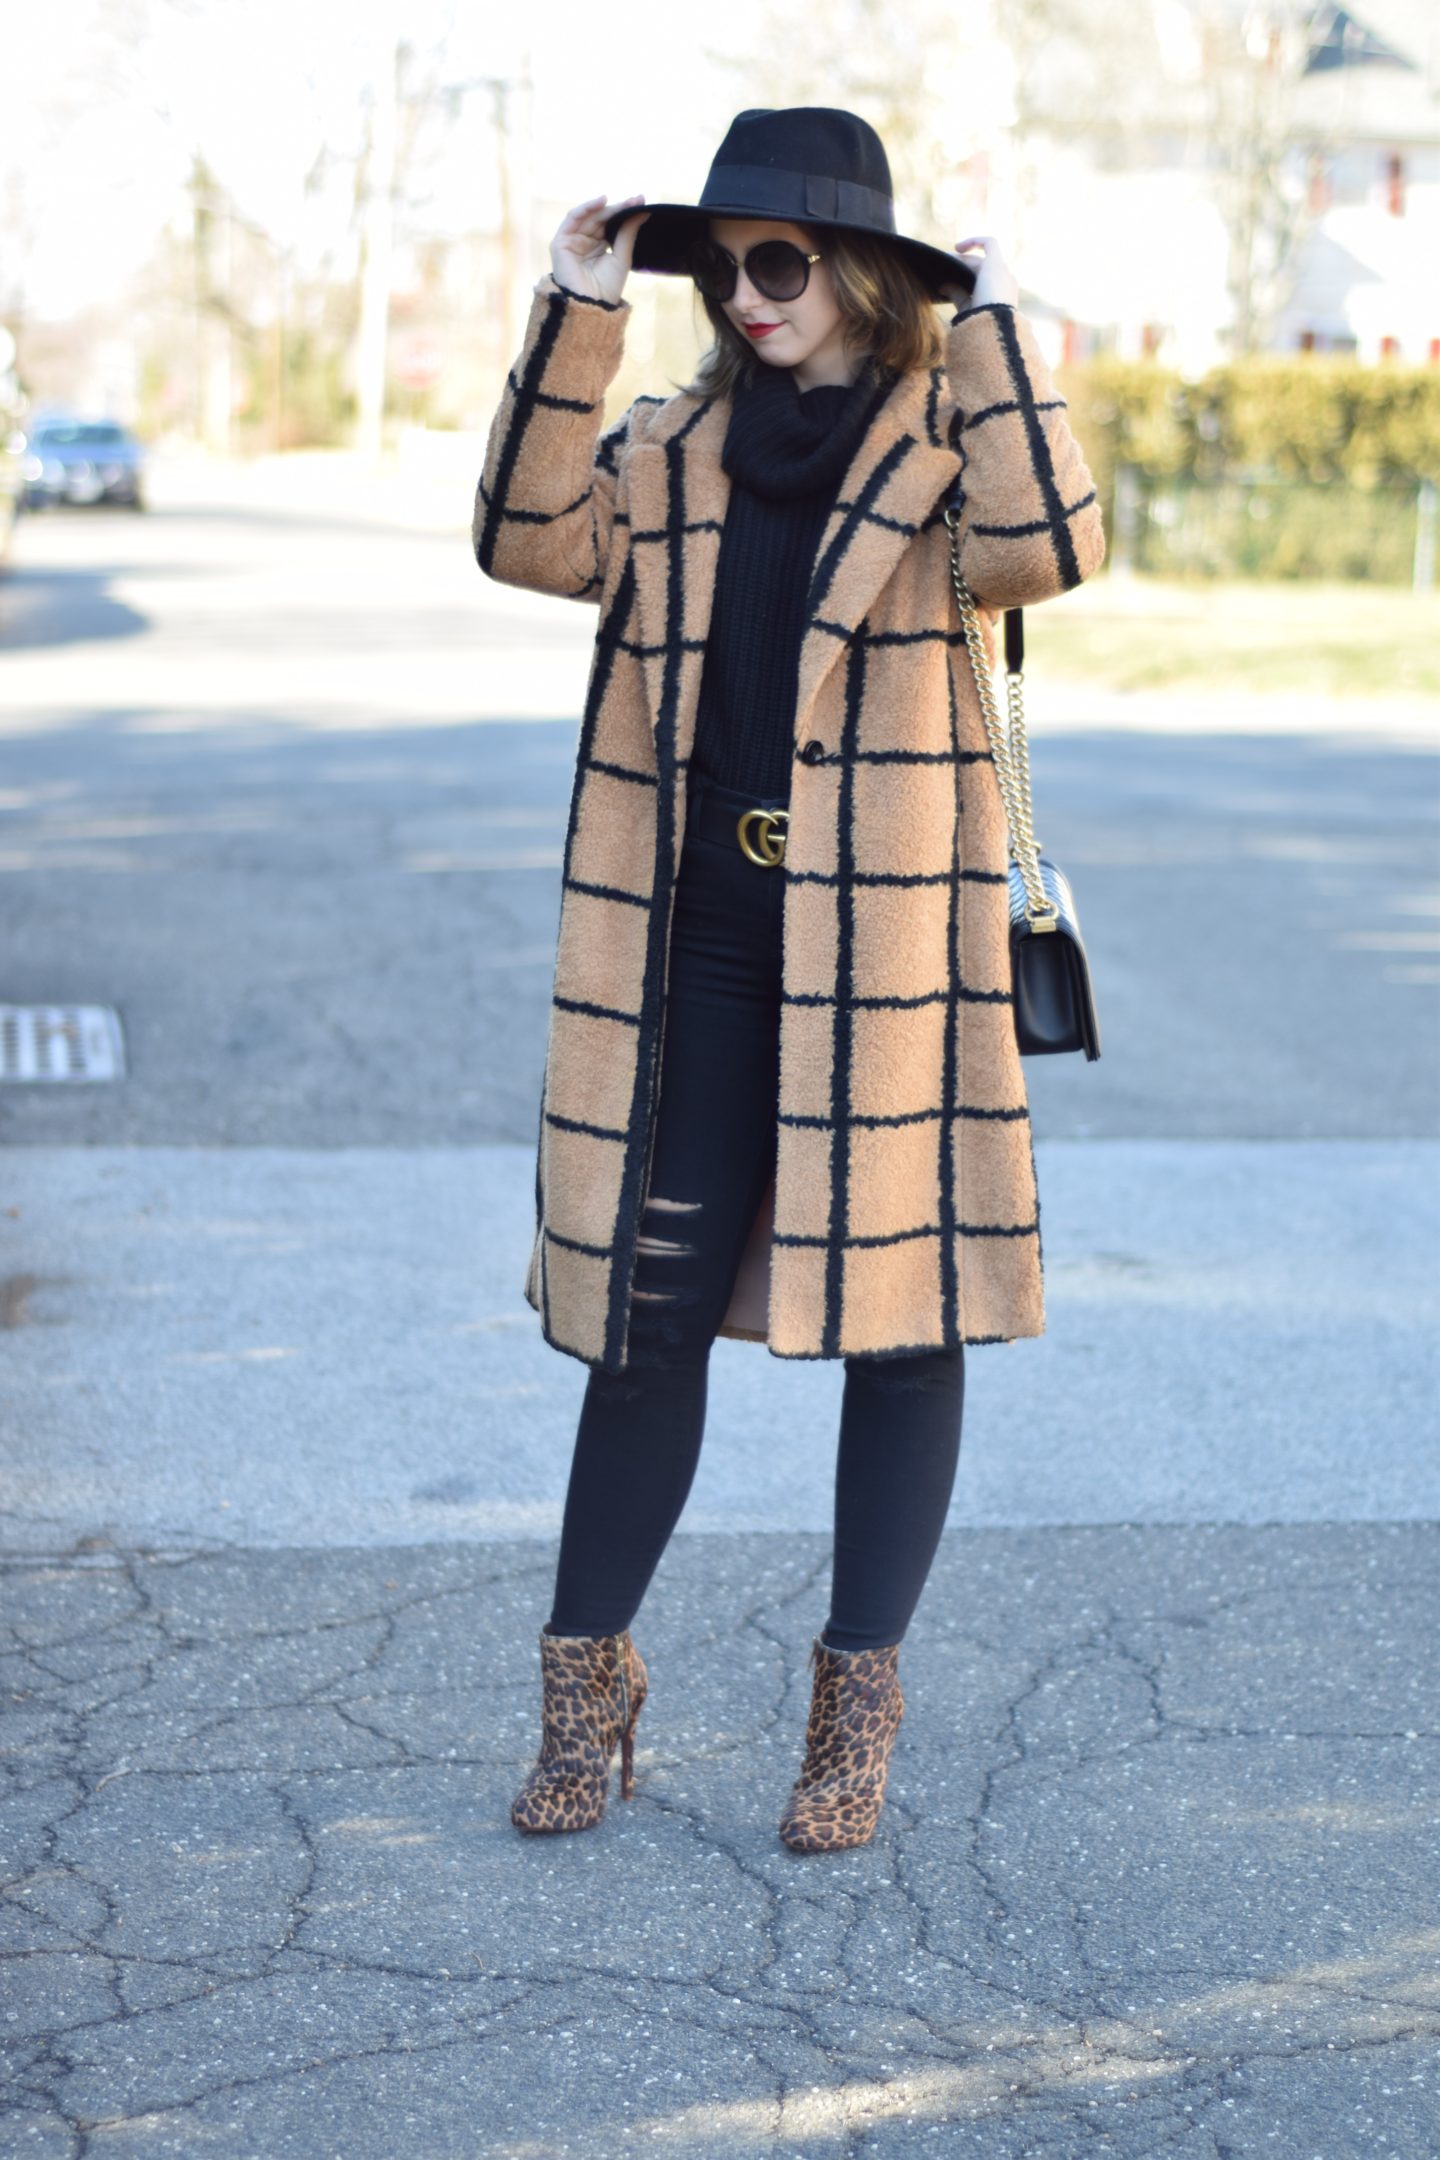 eye catching coats-style-camel outfit